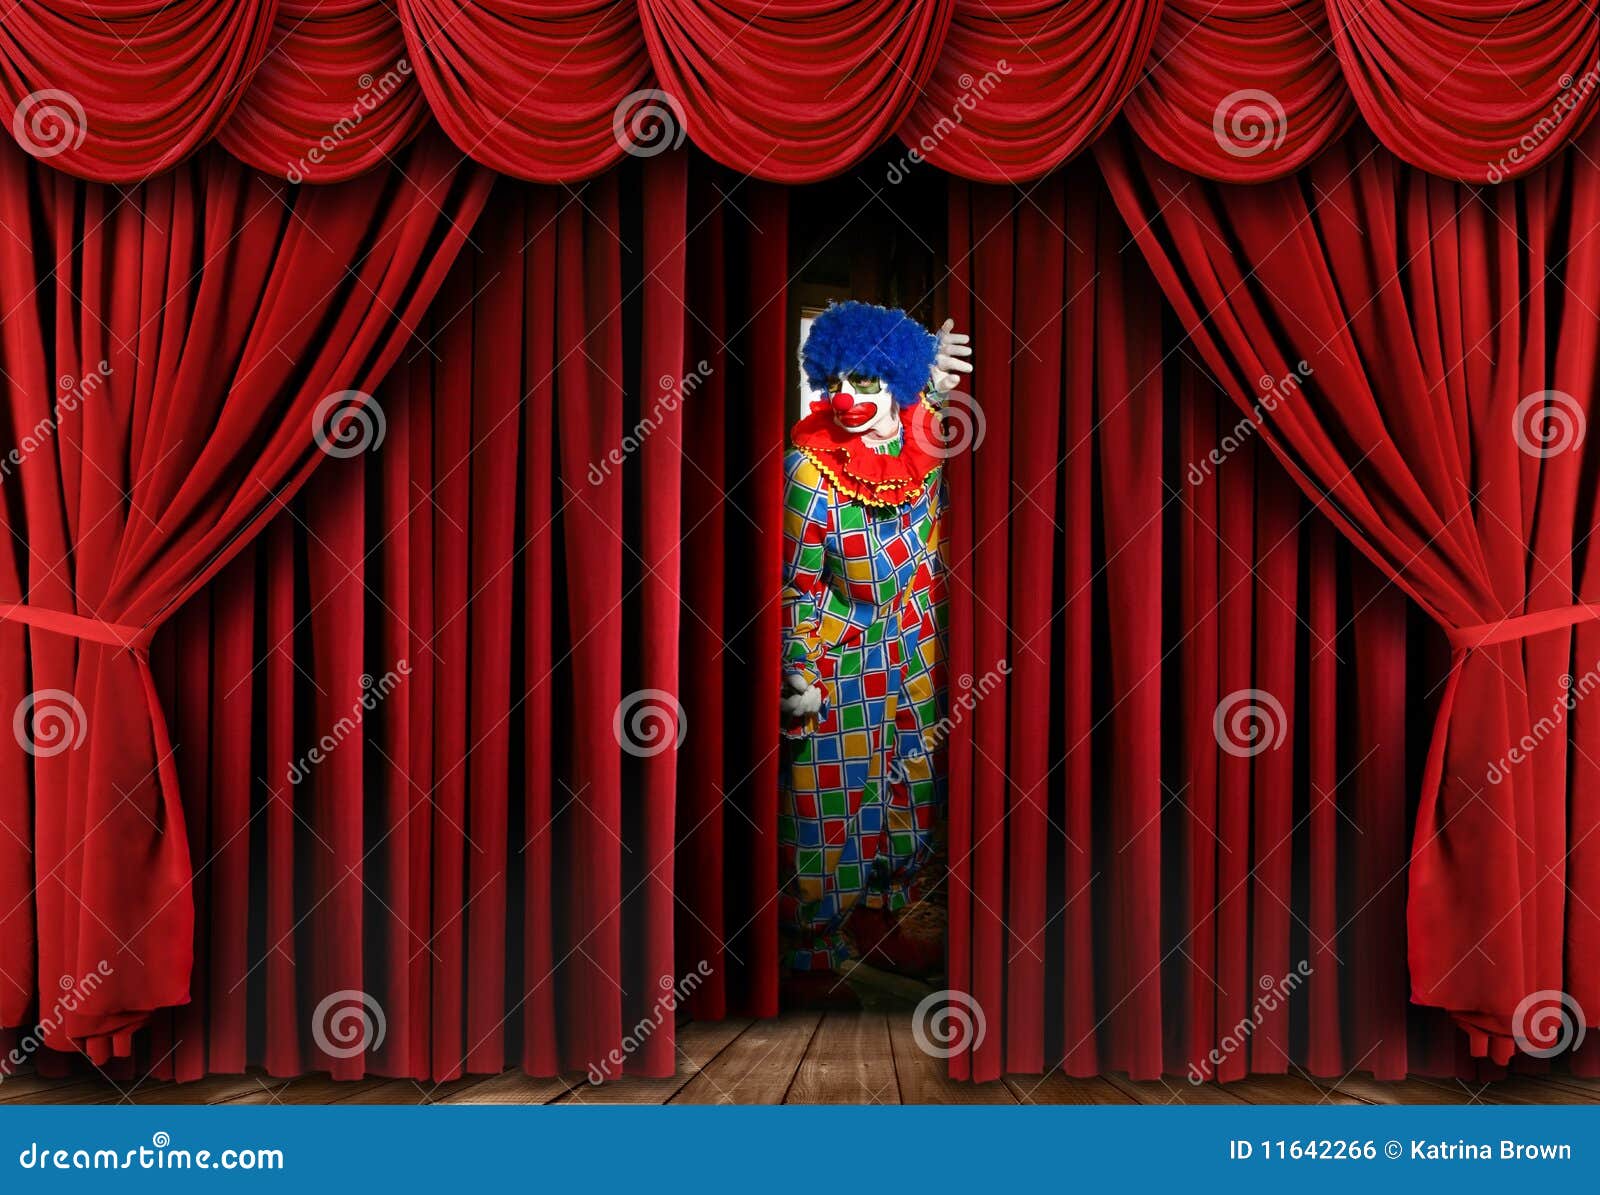 Clown On Stage Behind Curtain Stock Photo - Image of acting, clown ...